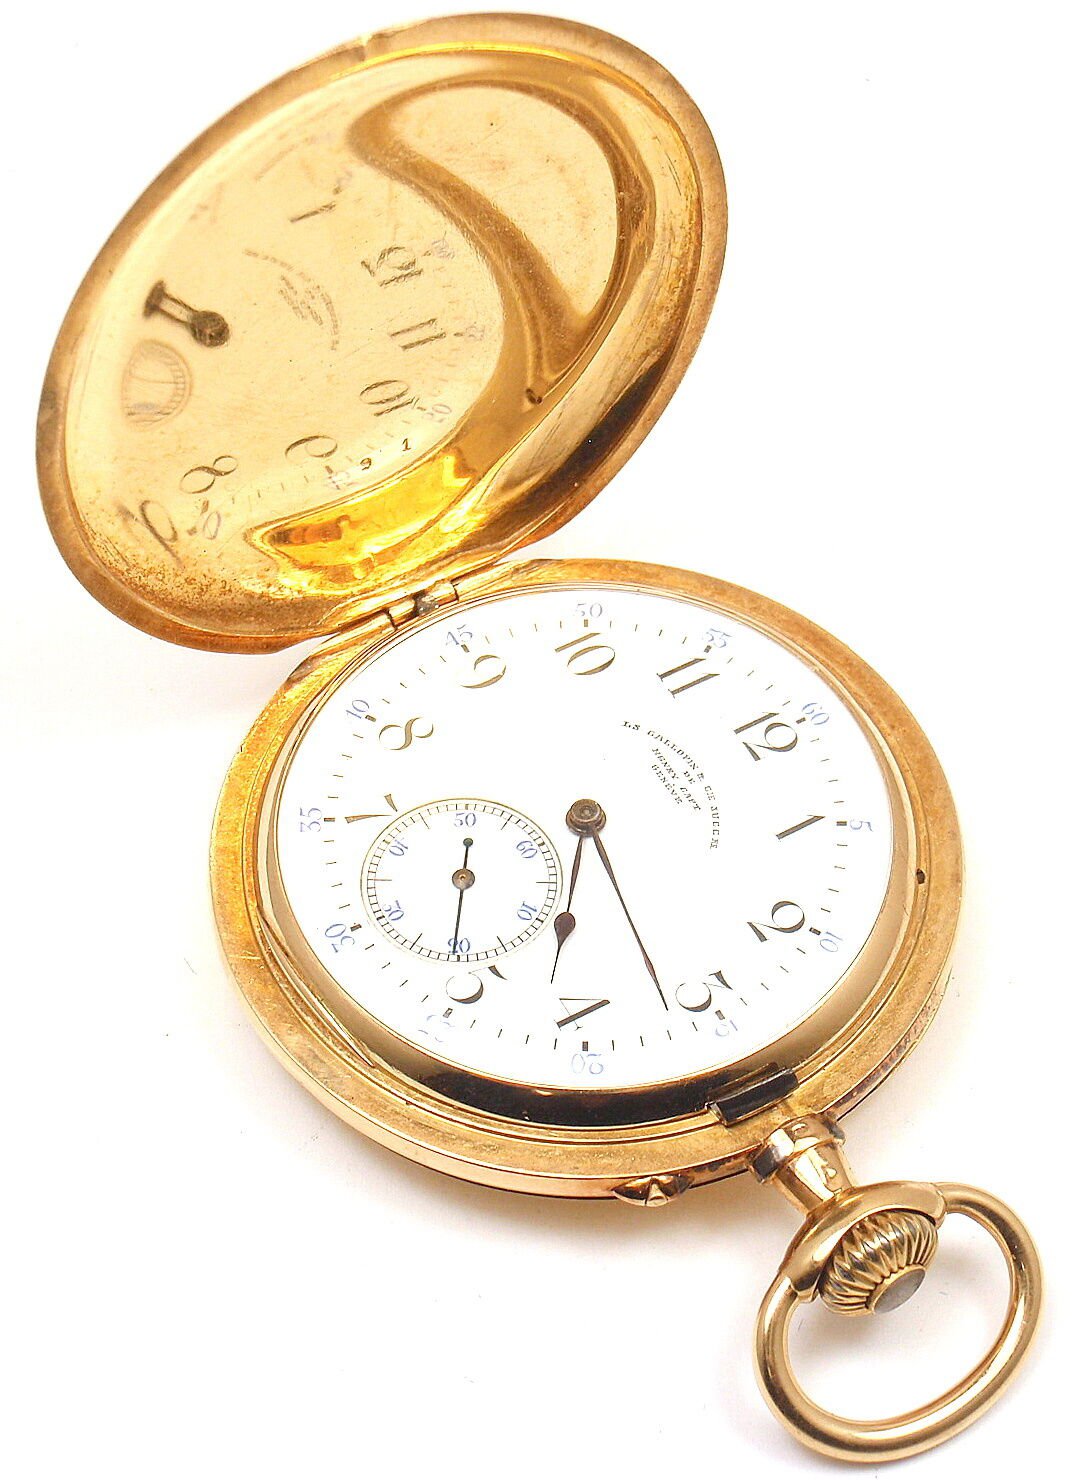 Henry Capt Jewelry & Watches:Watches, Parts & Accessories:Watches:Pocket Watches BEAUTIFUL RARE HENRY CAPT 18K YELLOW GOLD FINE CHRONOMATIC POCKET WATCH